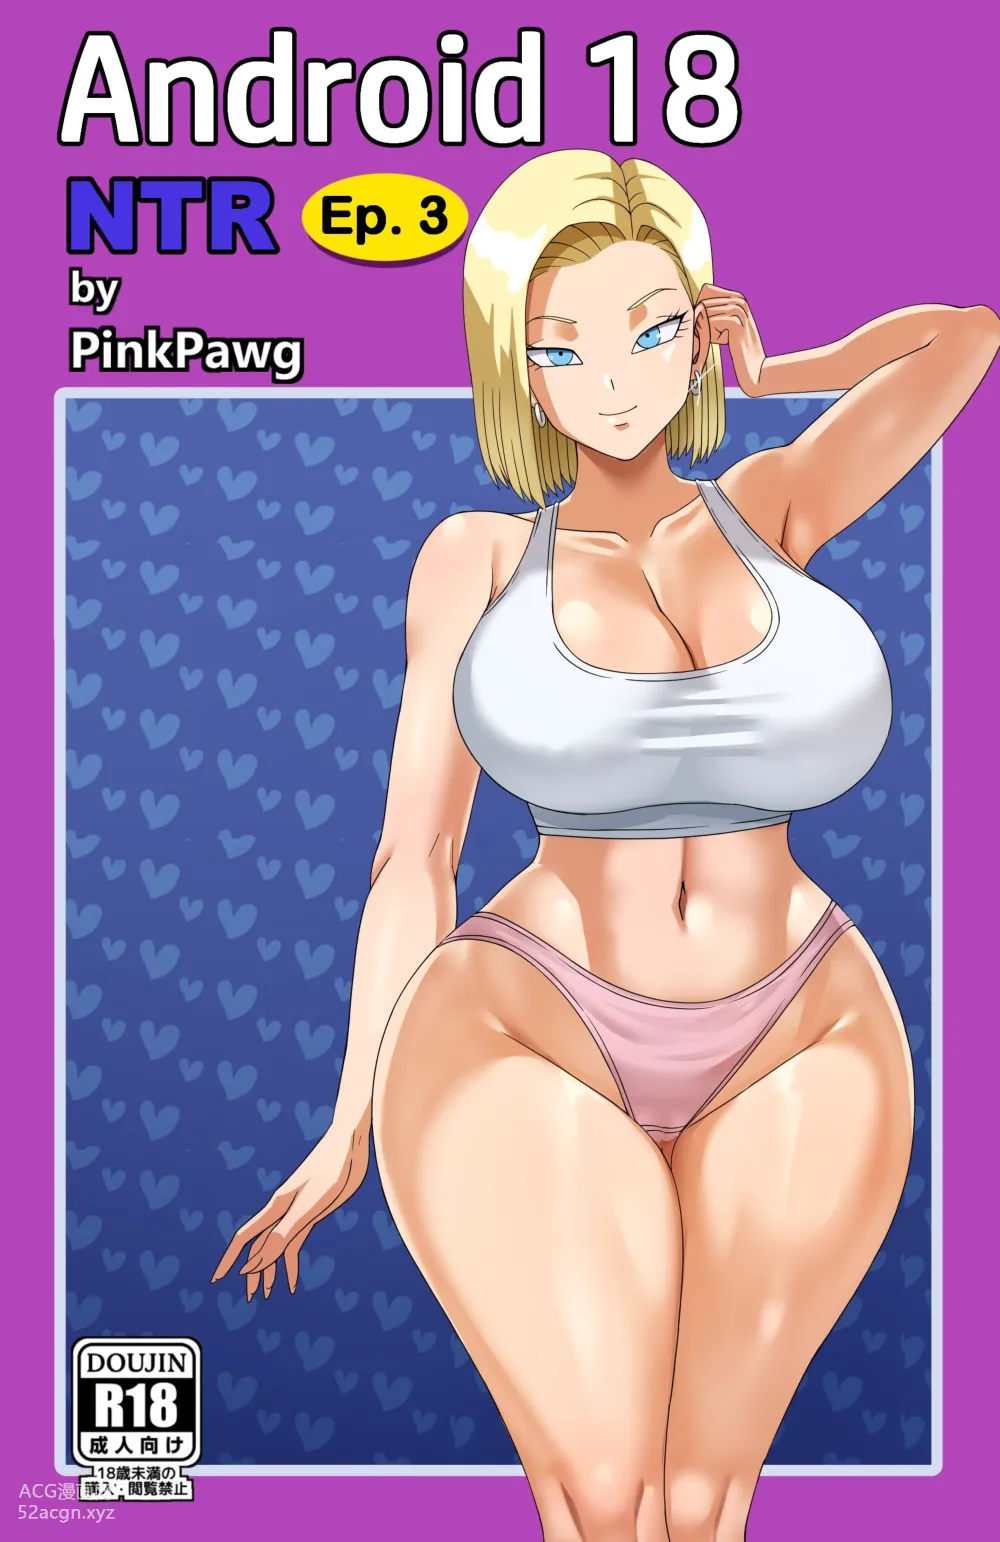 Android 18 Ass Porn - Android 18 NTR - Chapter 1 (Dragon Ball Super) - Western Porn Comics  Western Adult Comix